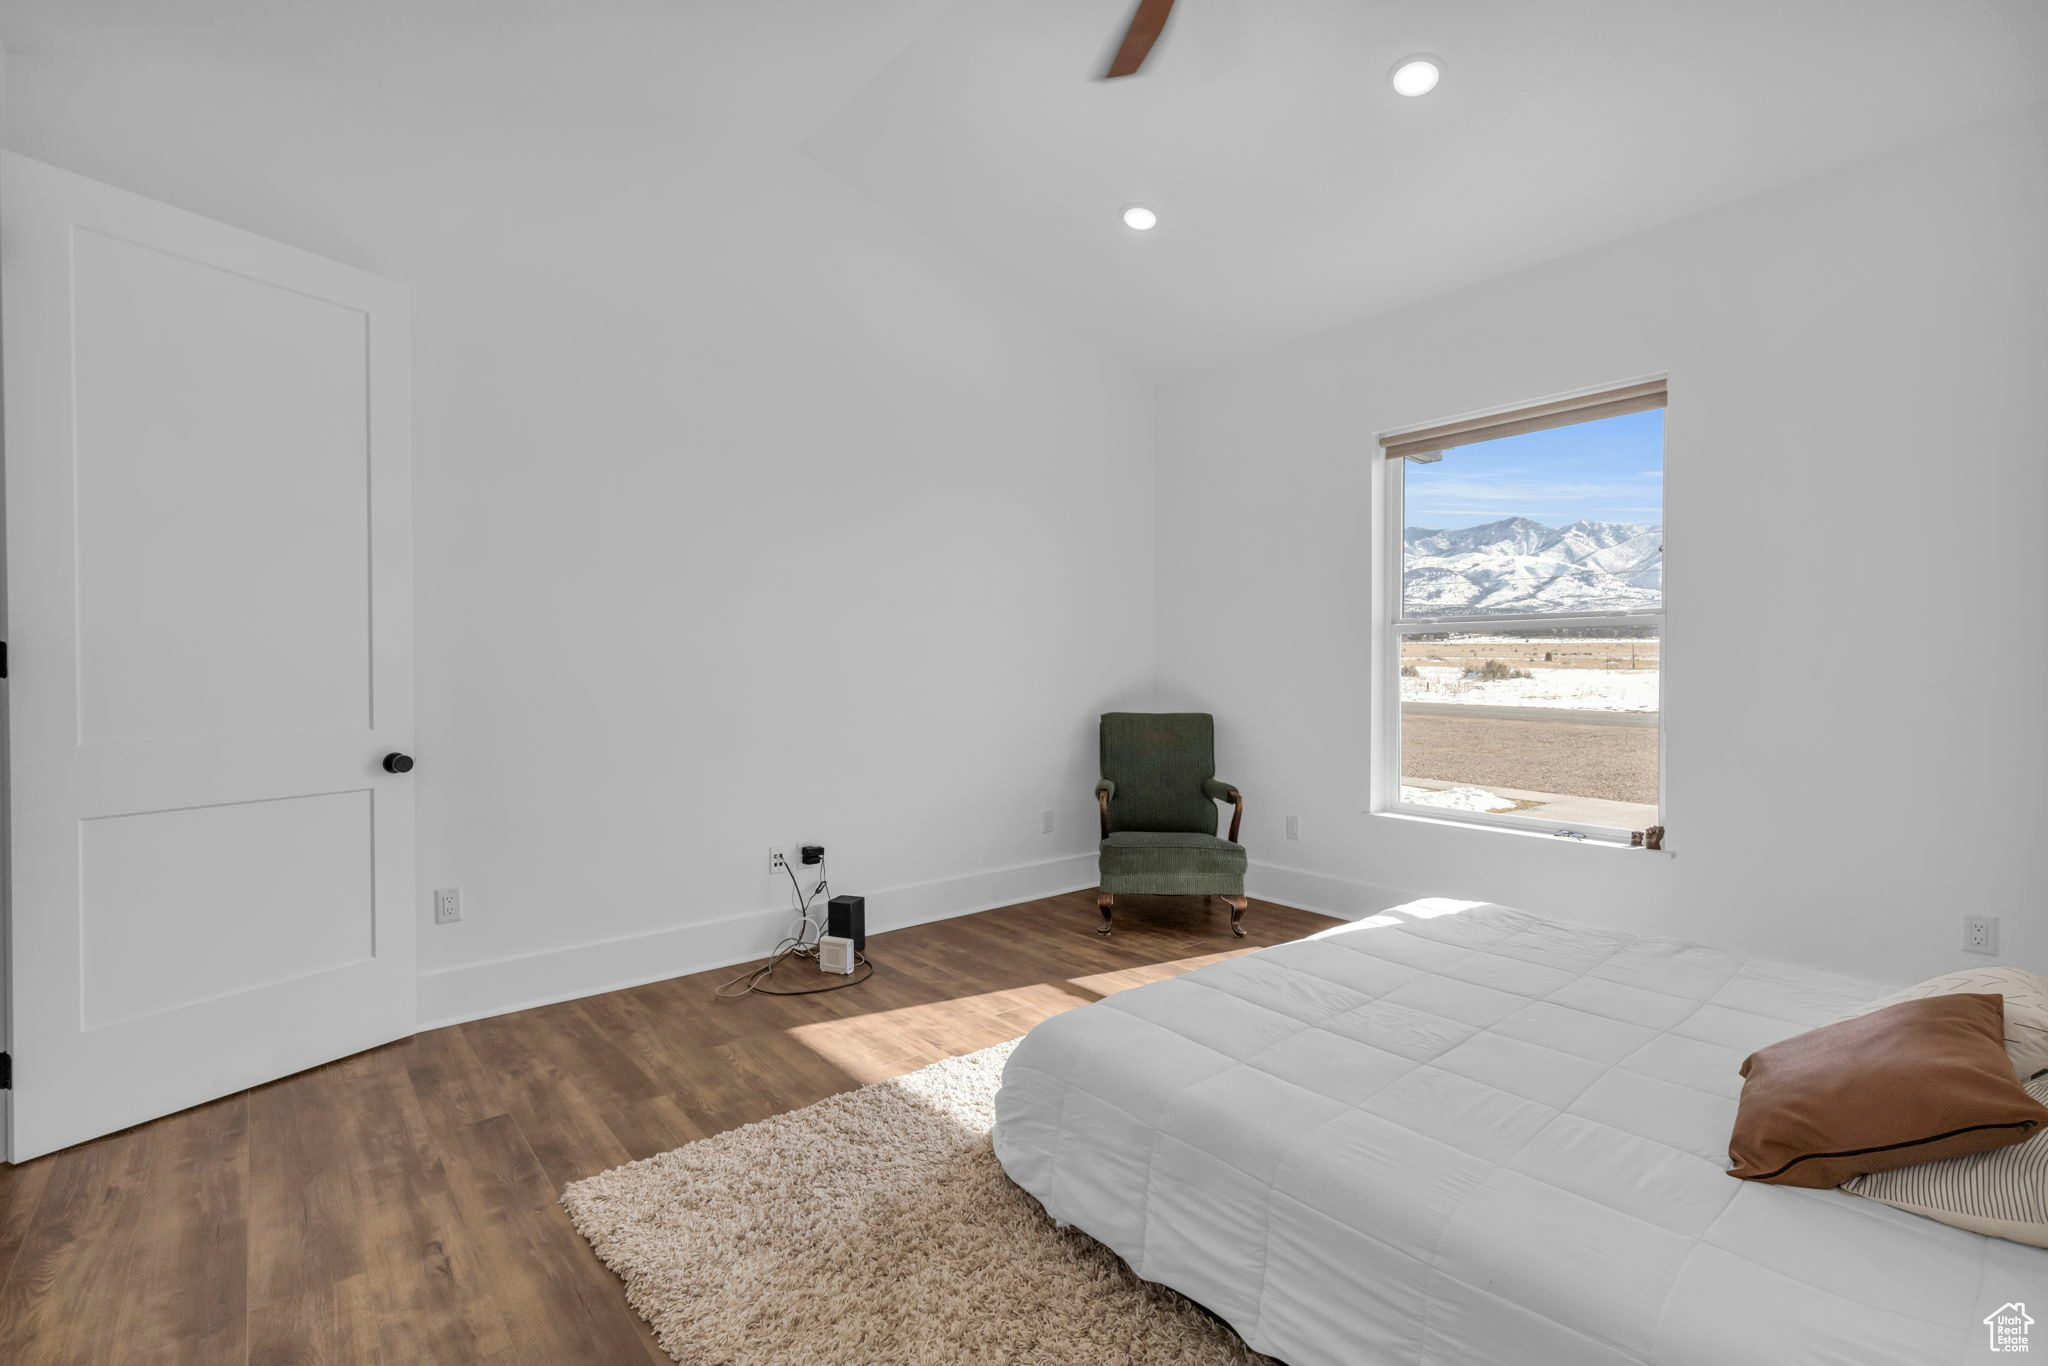 Bedroom with lofted ceiling, ceiling fan, and wood-type flooring